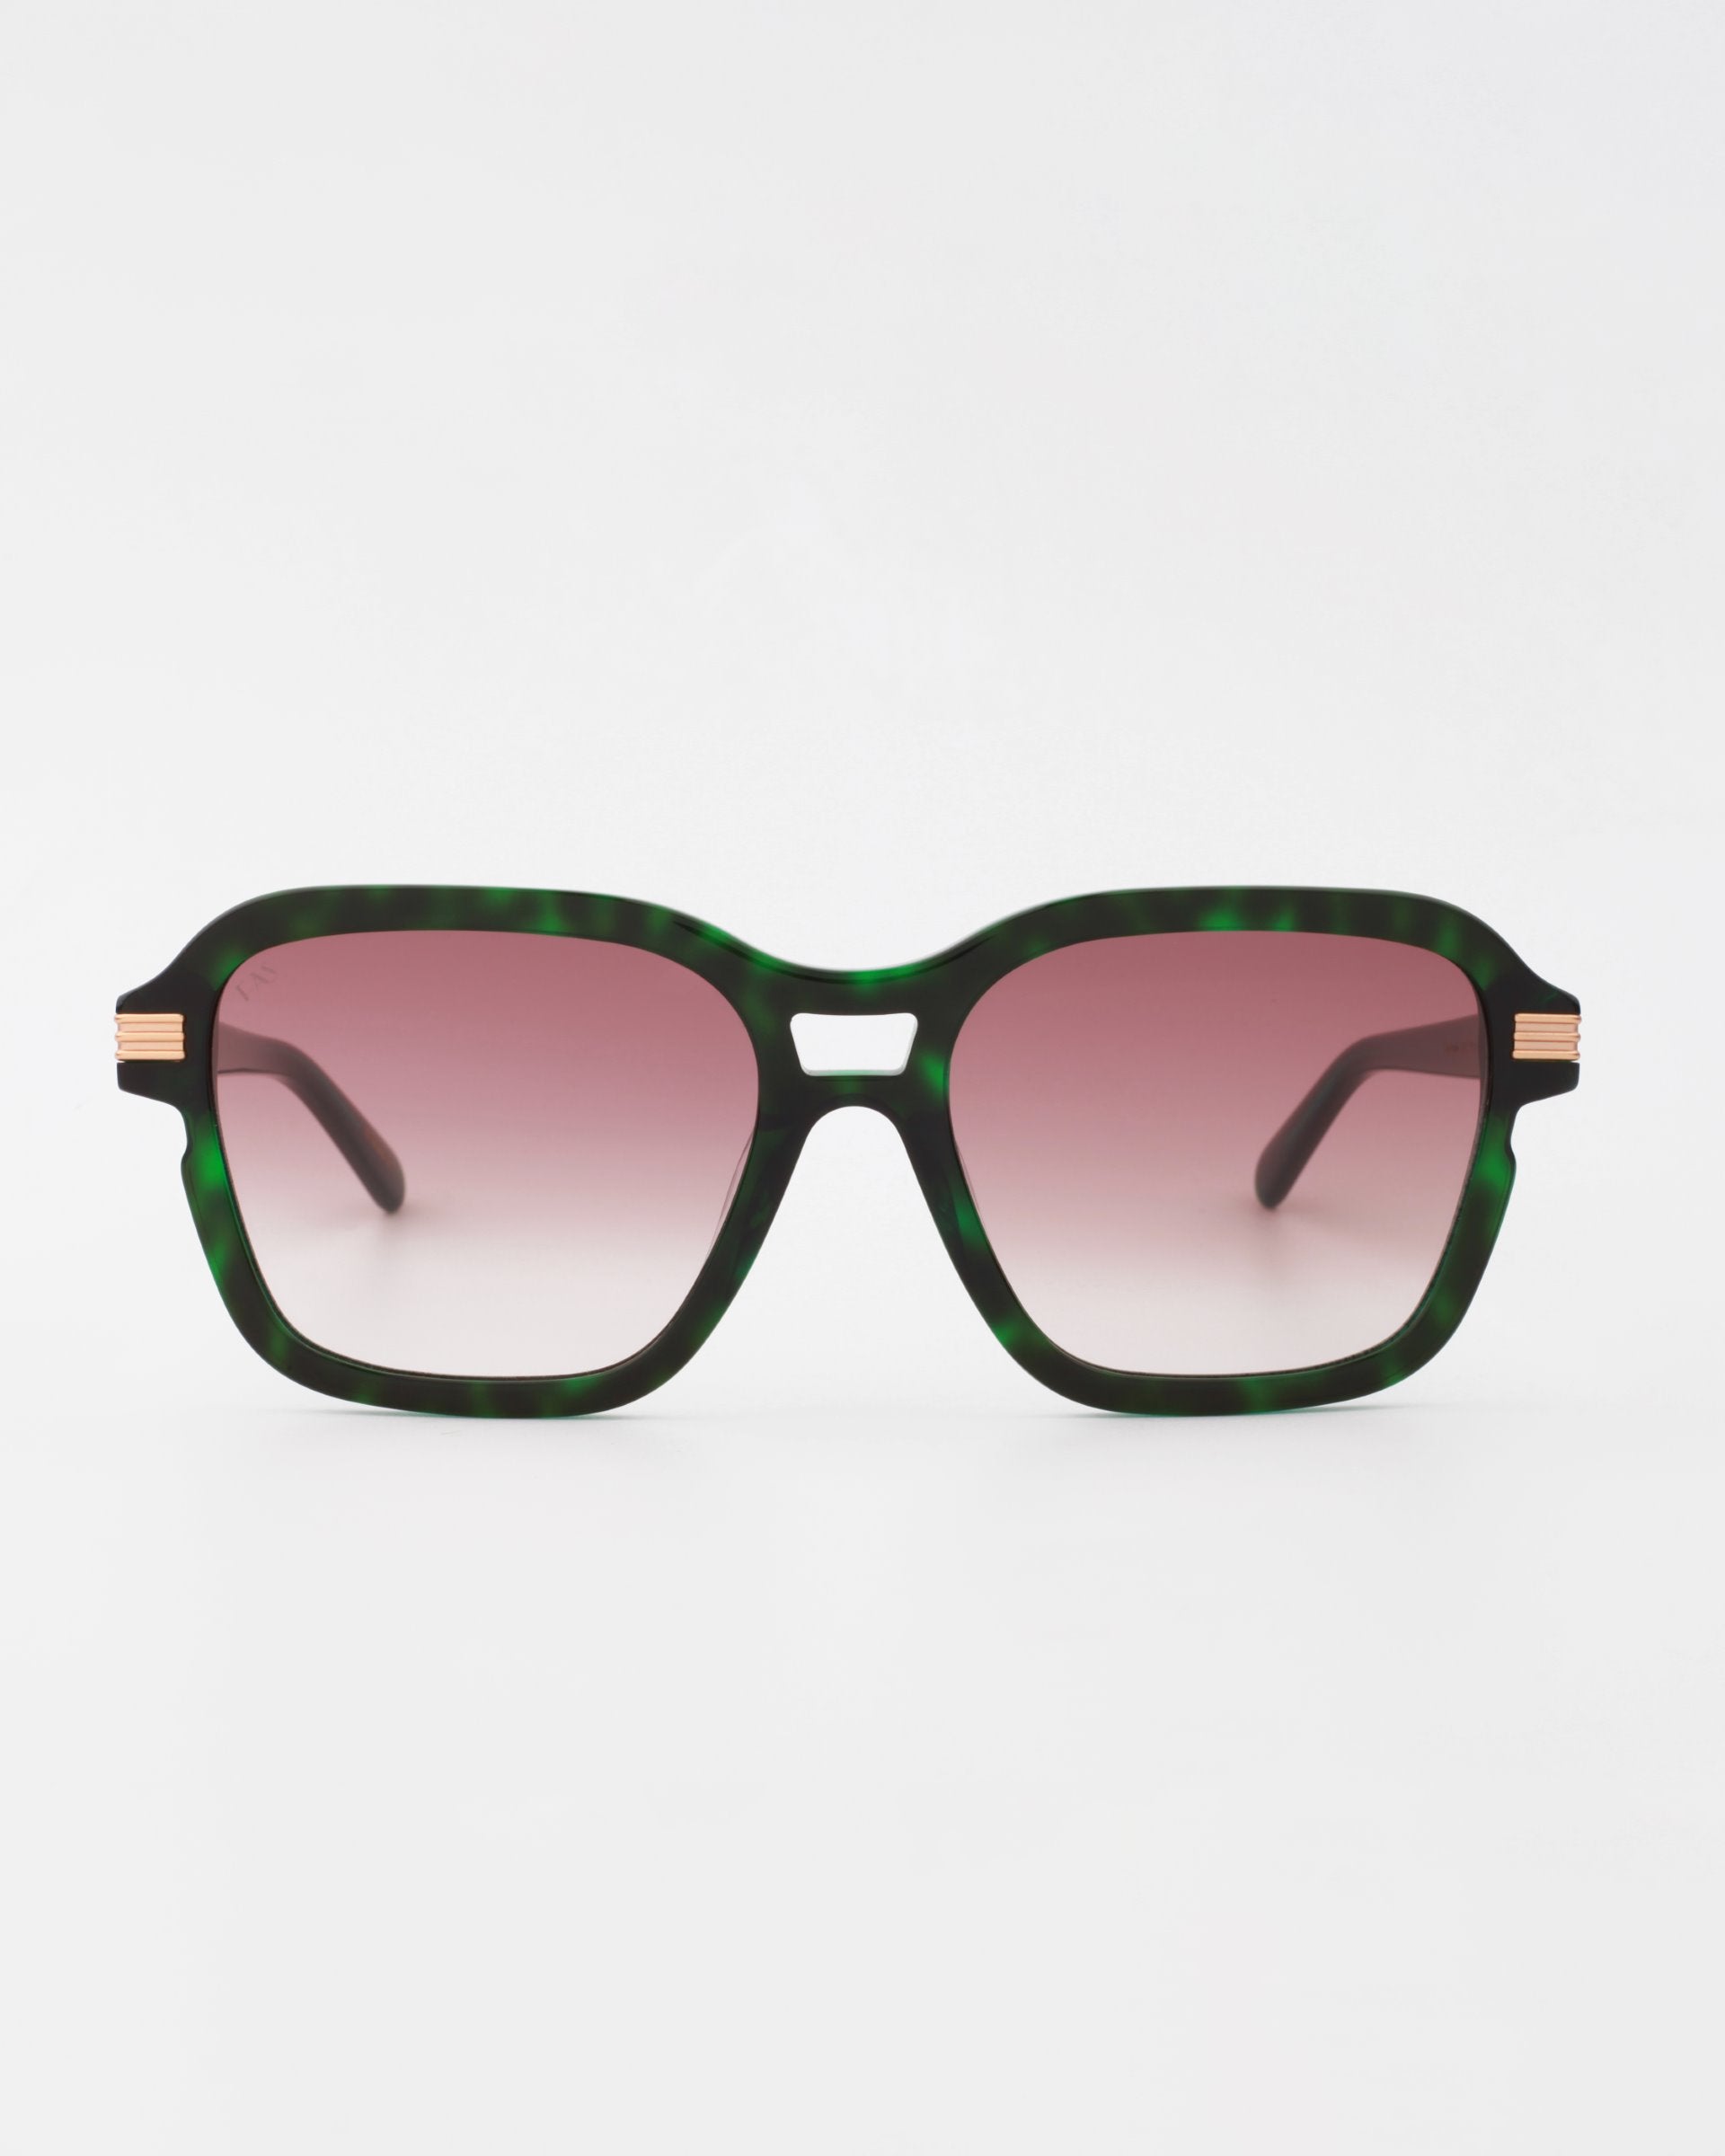 A pair of Shadyside sunglasses by For Art&#39;s Sake® with green tortoiseshell frames and shatter-resistant nylon lenses transitioning from pink to clear. The arms are thin and black, accented with gold-plated temple detail near the hinges. Set against a plain white background.